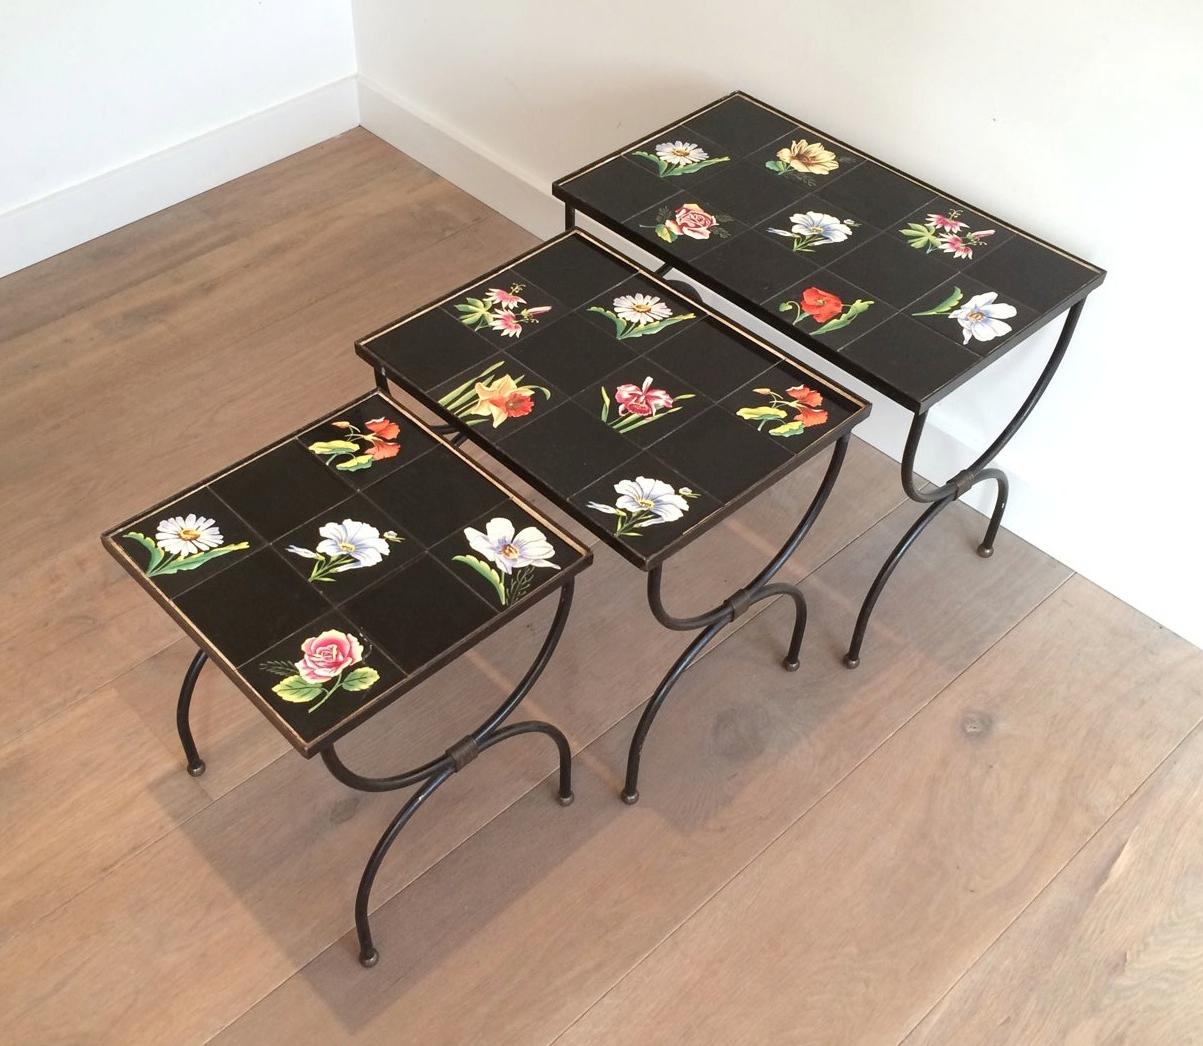 This unusual nesting tables are made of black lacquered iron with ceramic tiles on top showing flowers. This is a French Work in the style of famous French designer Jean Royère. Circa 1950.